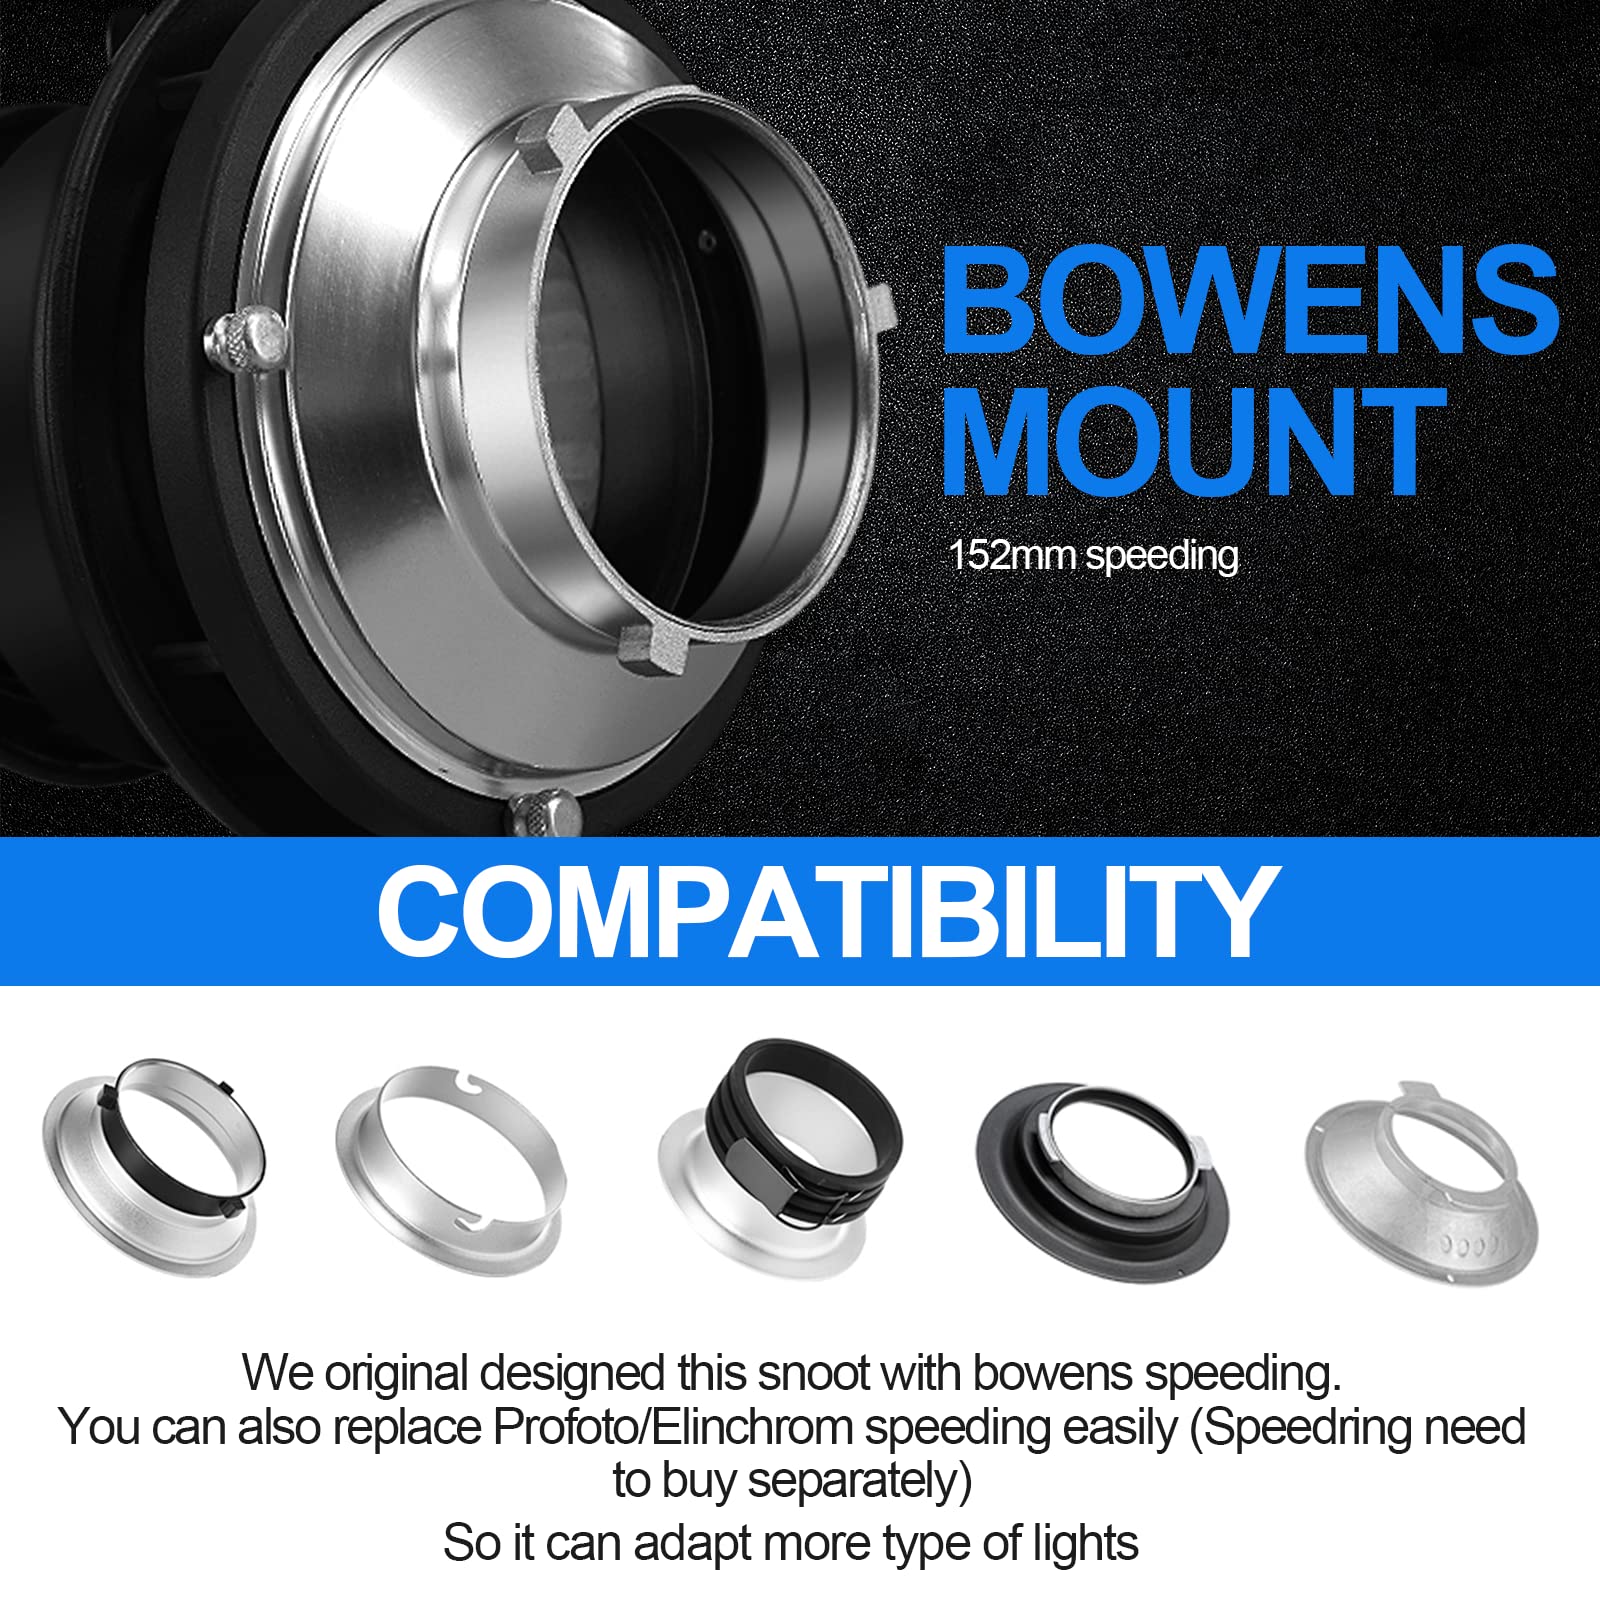 Wellmaking Bowens Mount Flash snoot conical Lens Video Artist Modelling Shape Light Studio use with Optical Lens Various Gobos Bowens Photography Accessories